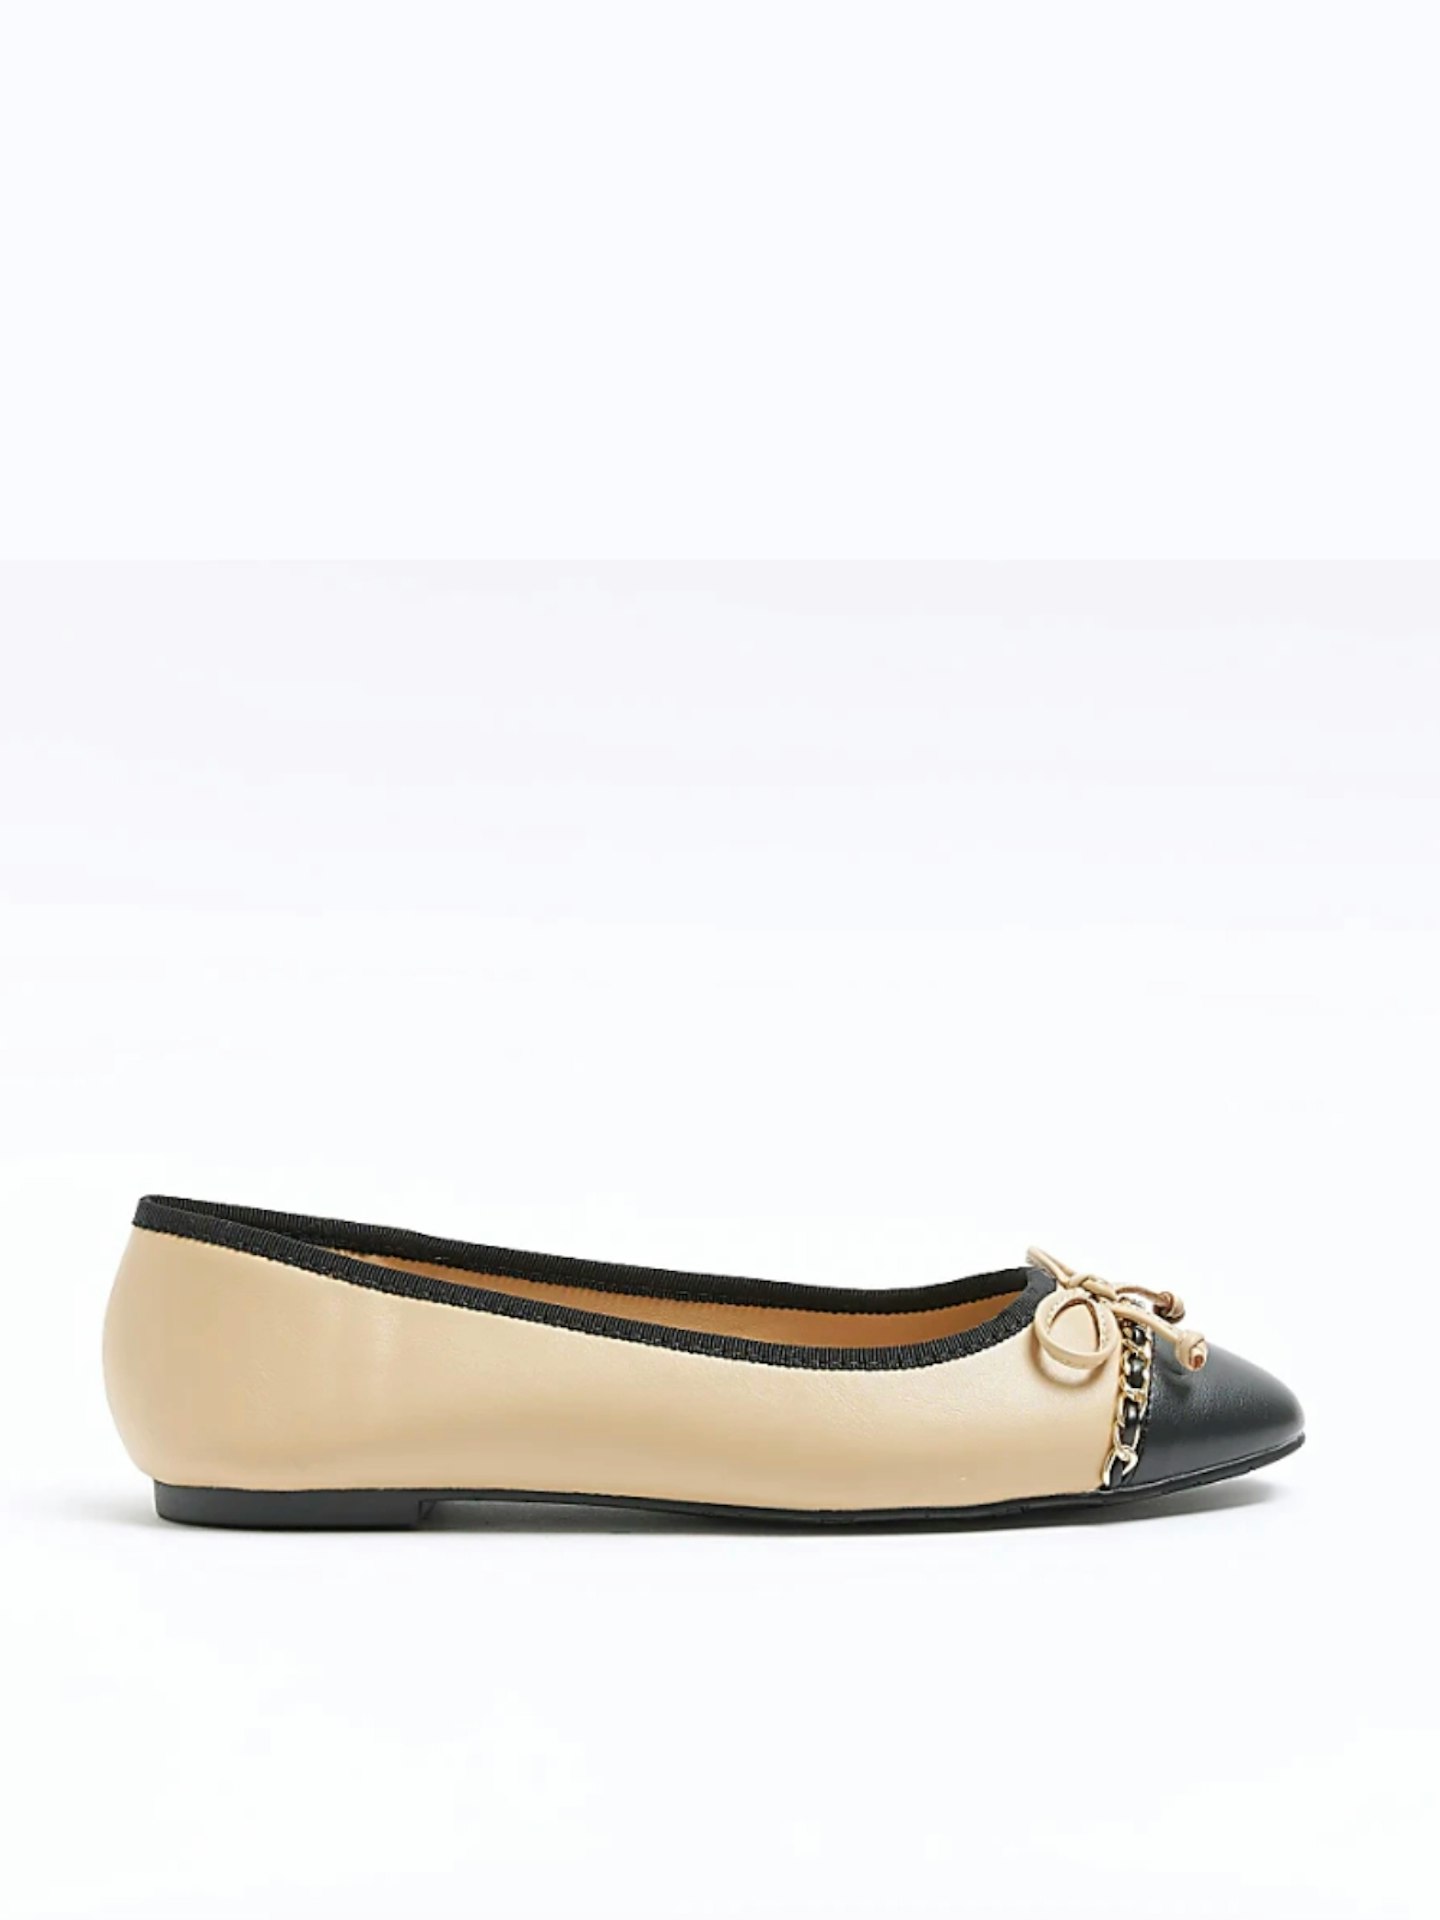 TikTok Has The Best Chanel Slingback Heel Dupe For Just £35